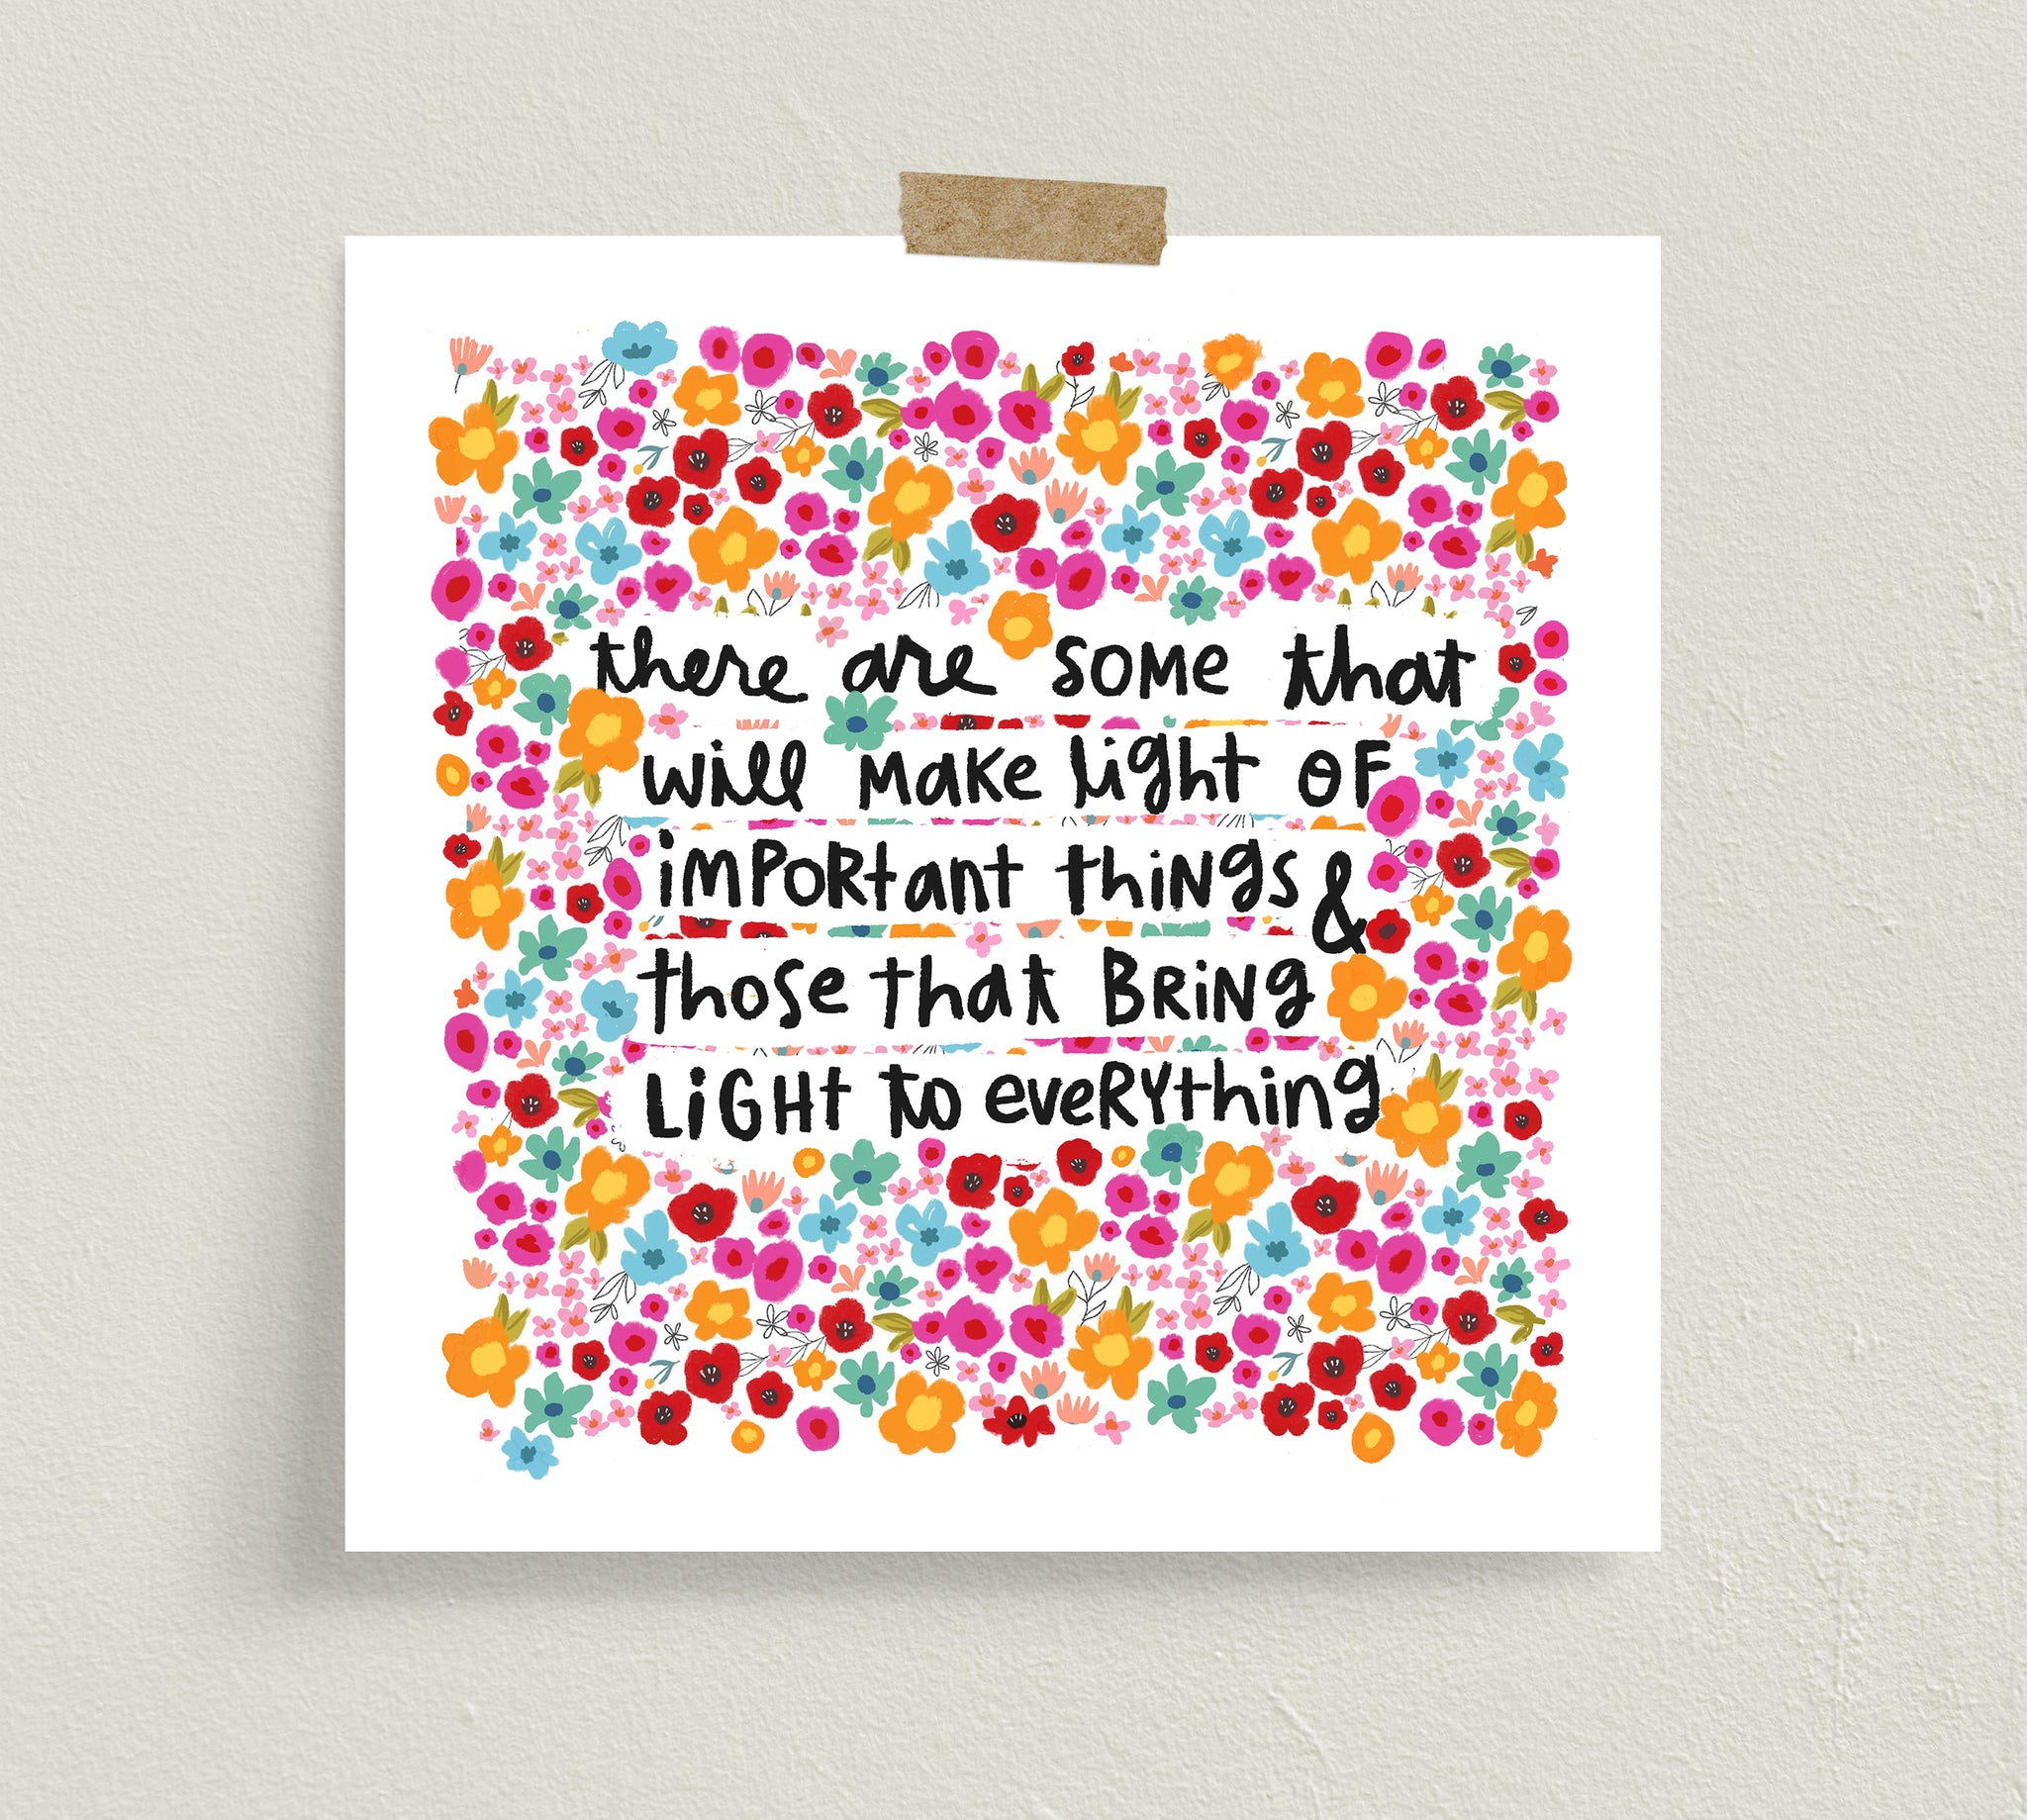 Fine art prints by Eliza Todd featuring many bright little flowers saying "There are some that will make light of important things and those that bring light to everything." - APeaceofWerk.com